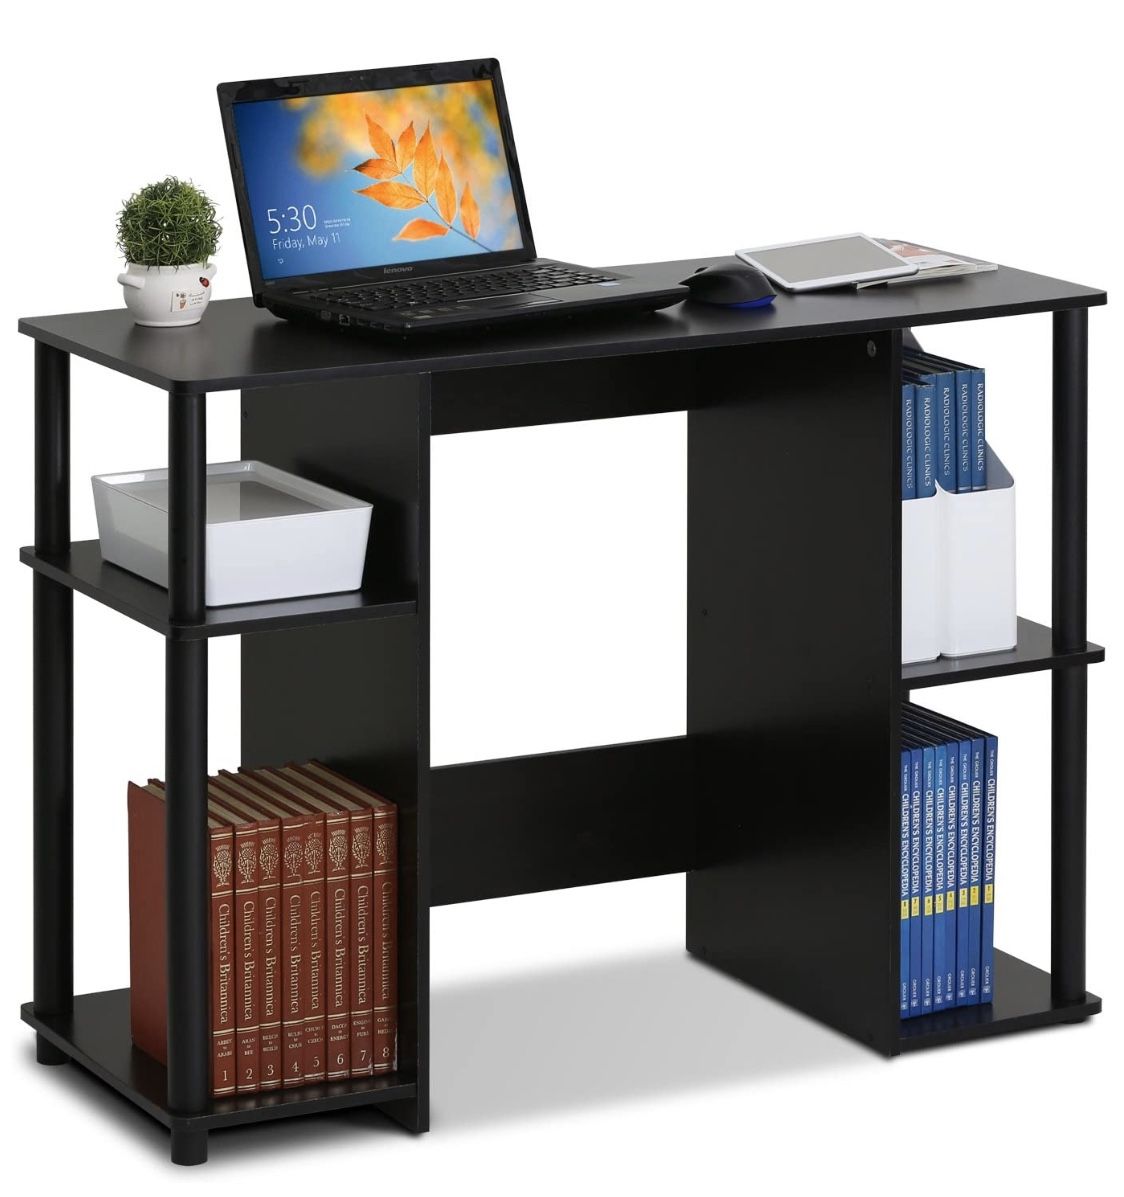 Compact desk with bookshelves